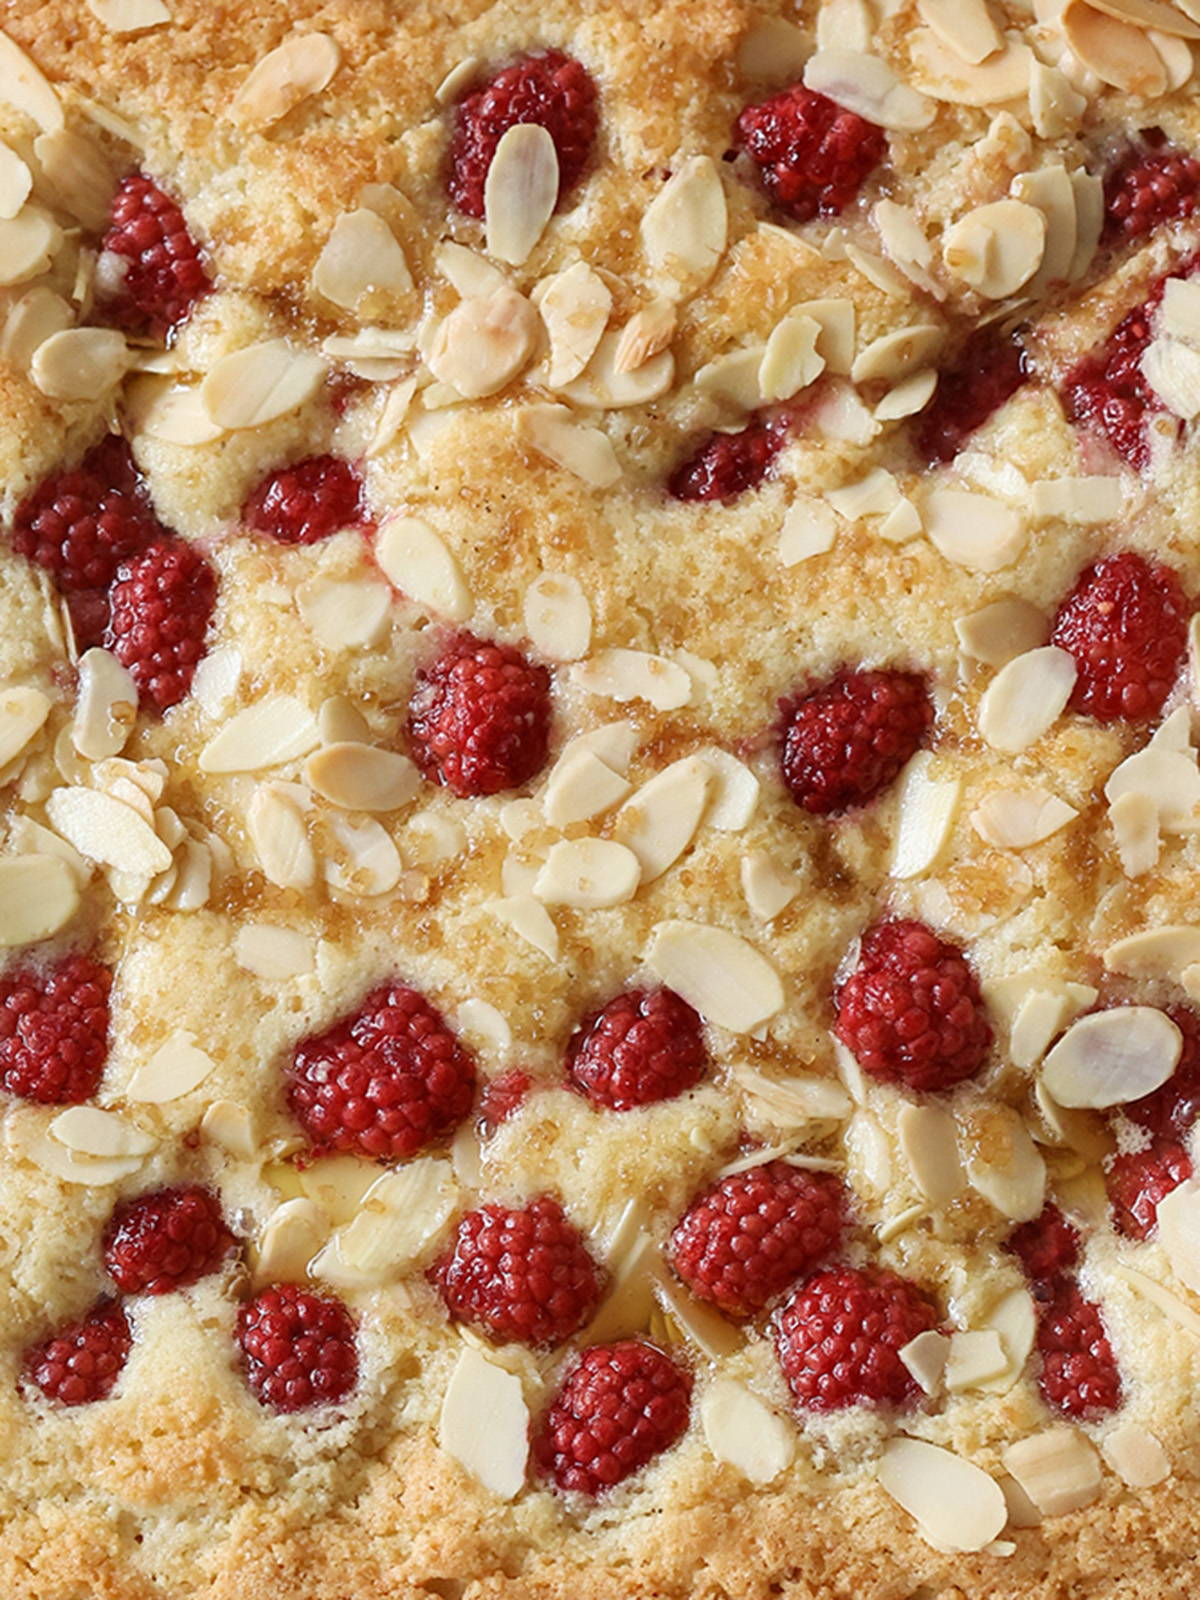 A close up of a Raspberry Frangipane Bake in a Square bake tray.